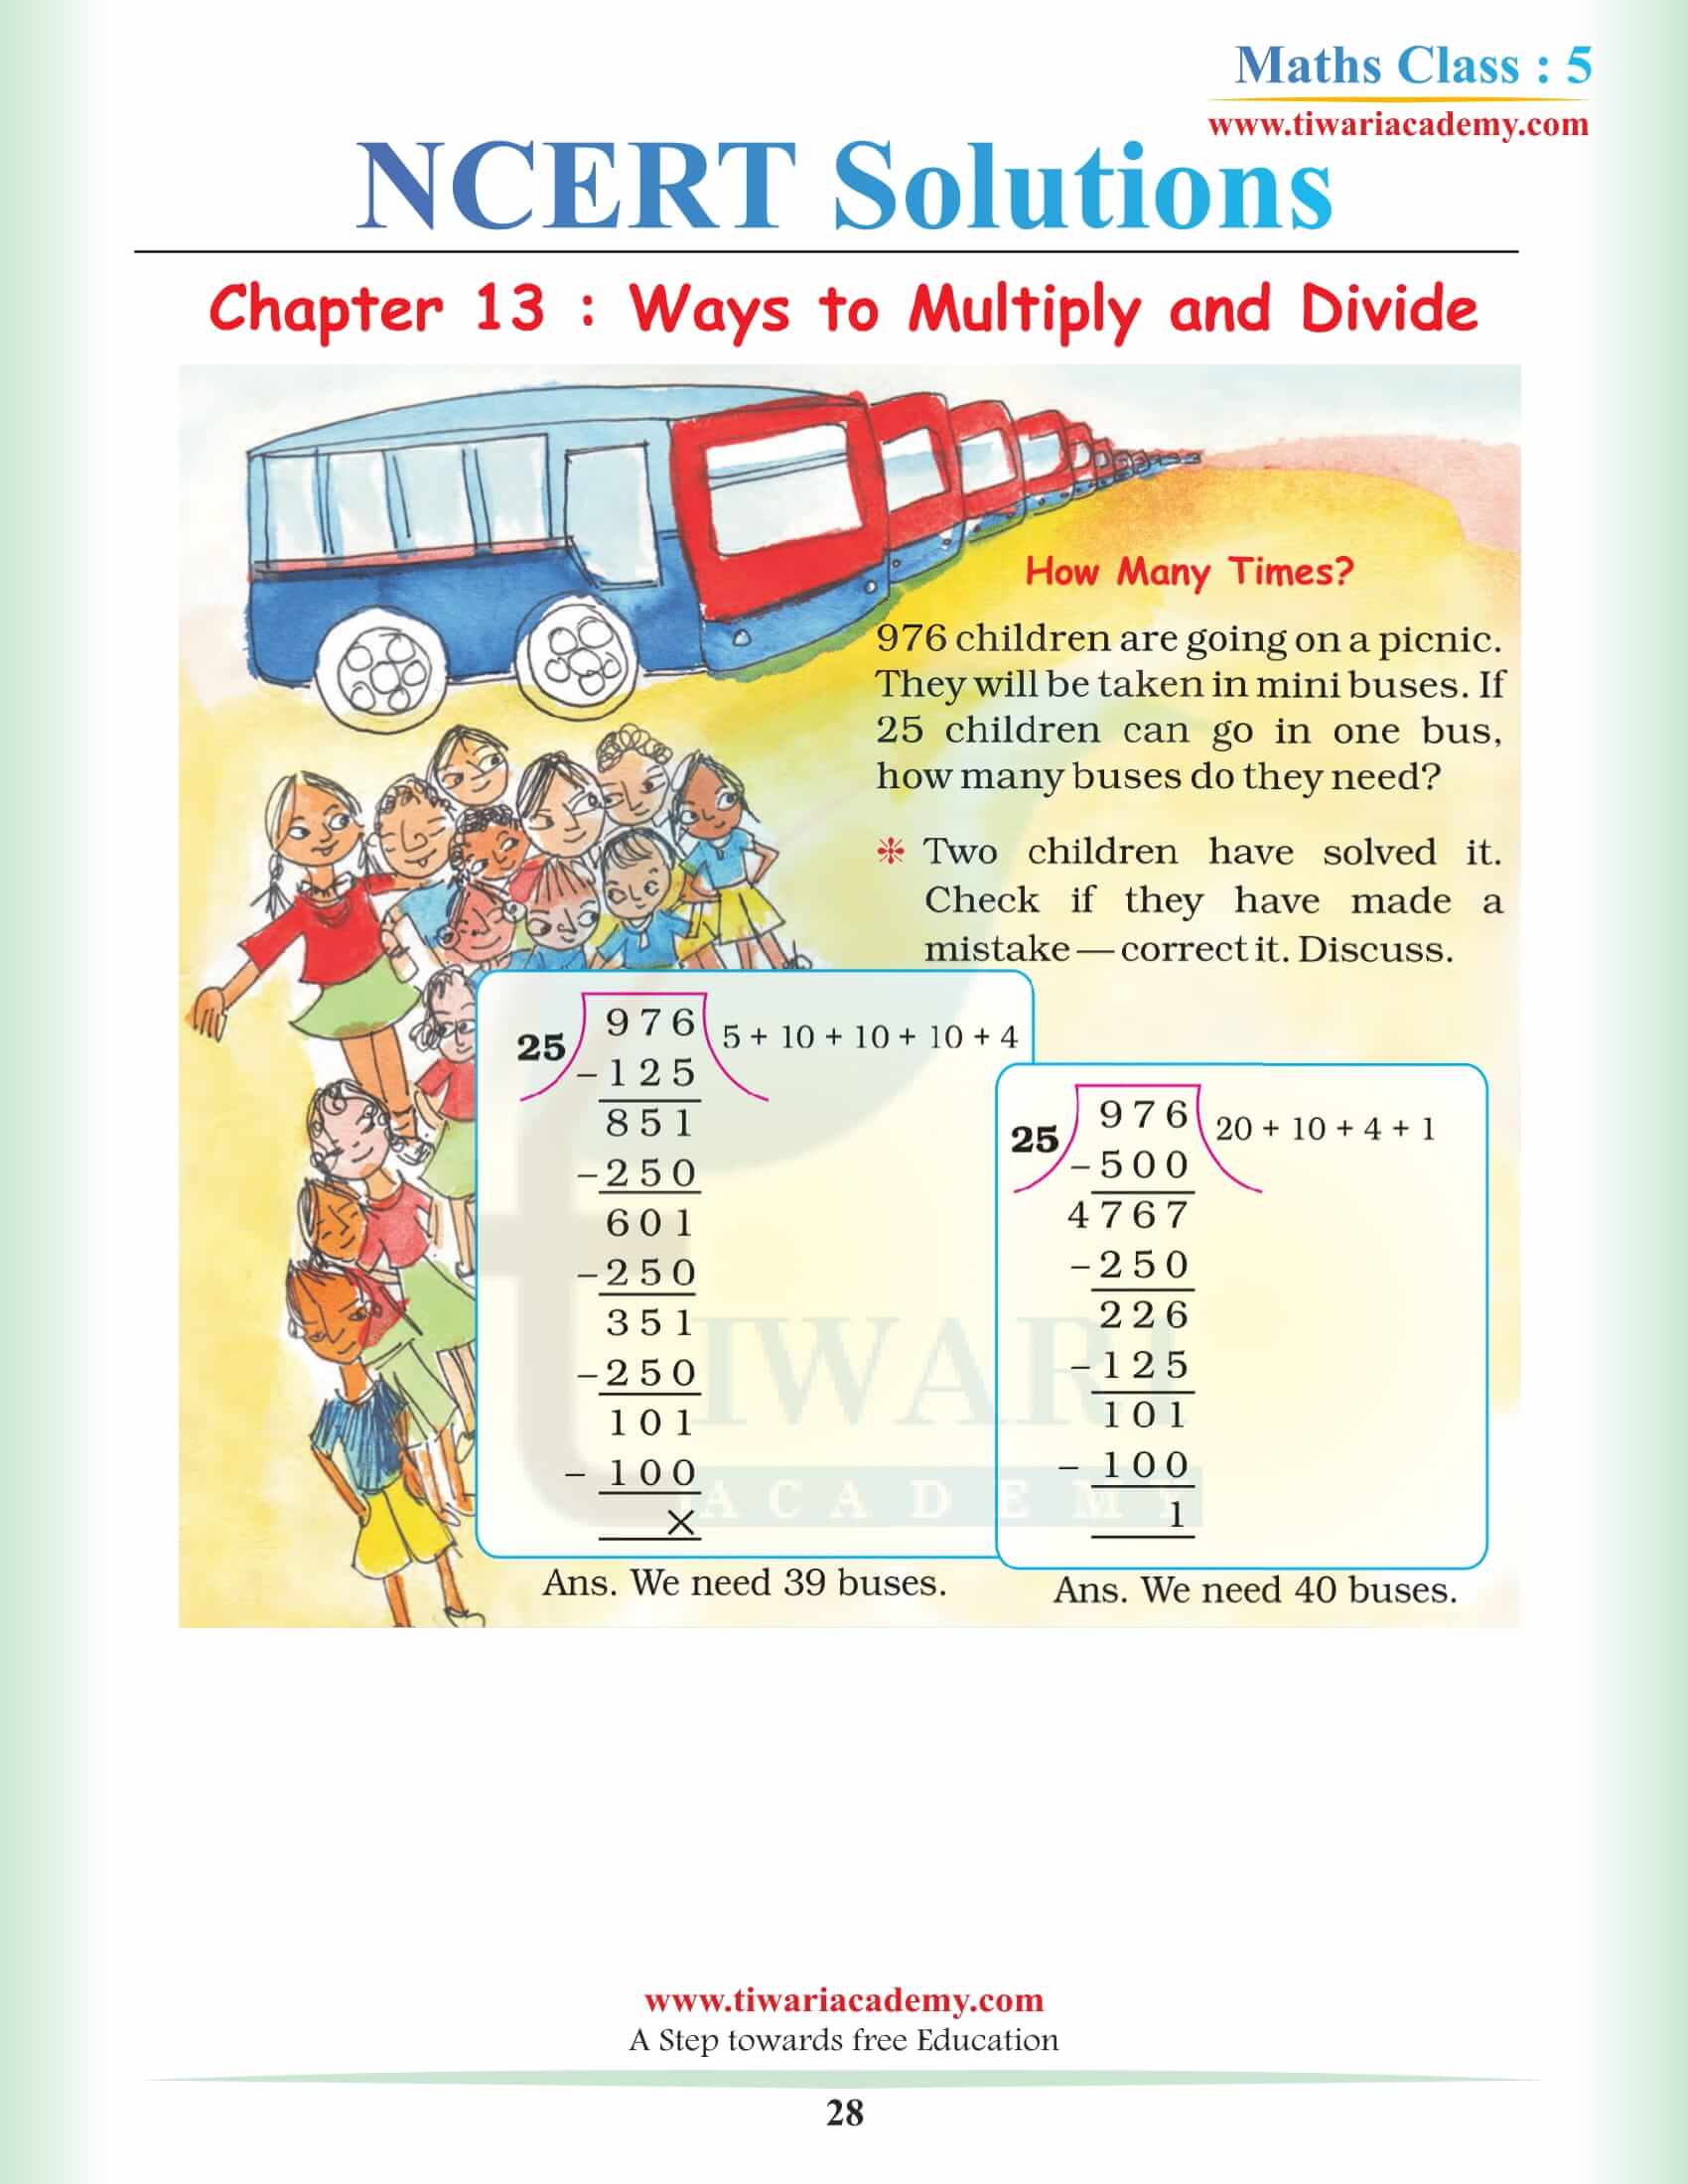 5th Maths Chapter 13 NCERT Question Answers